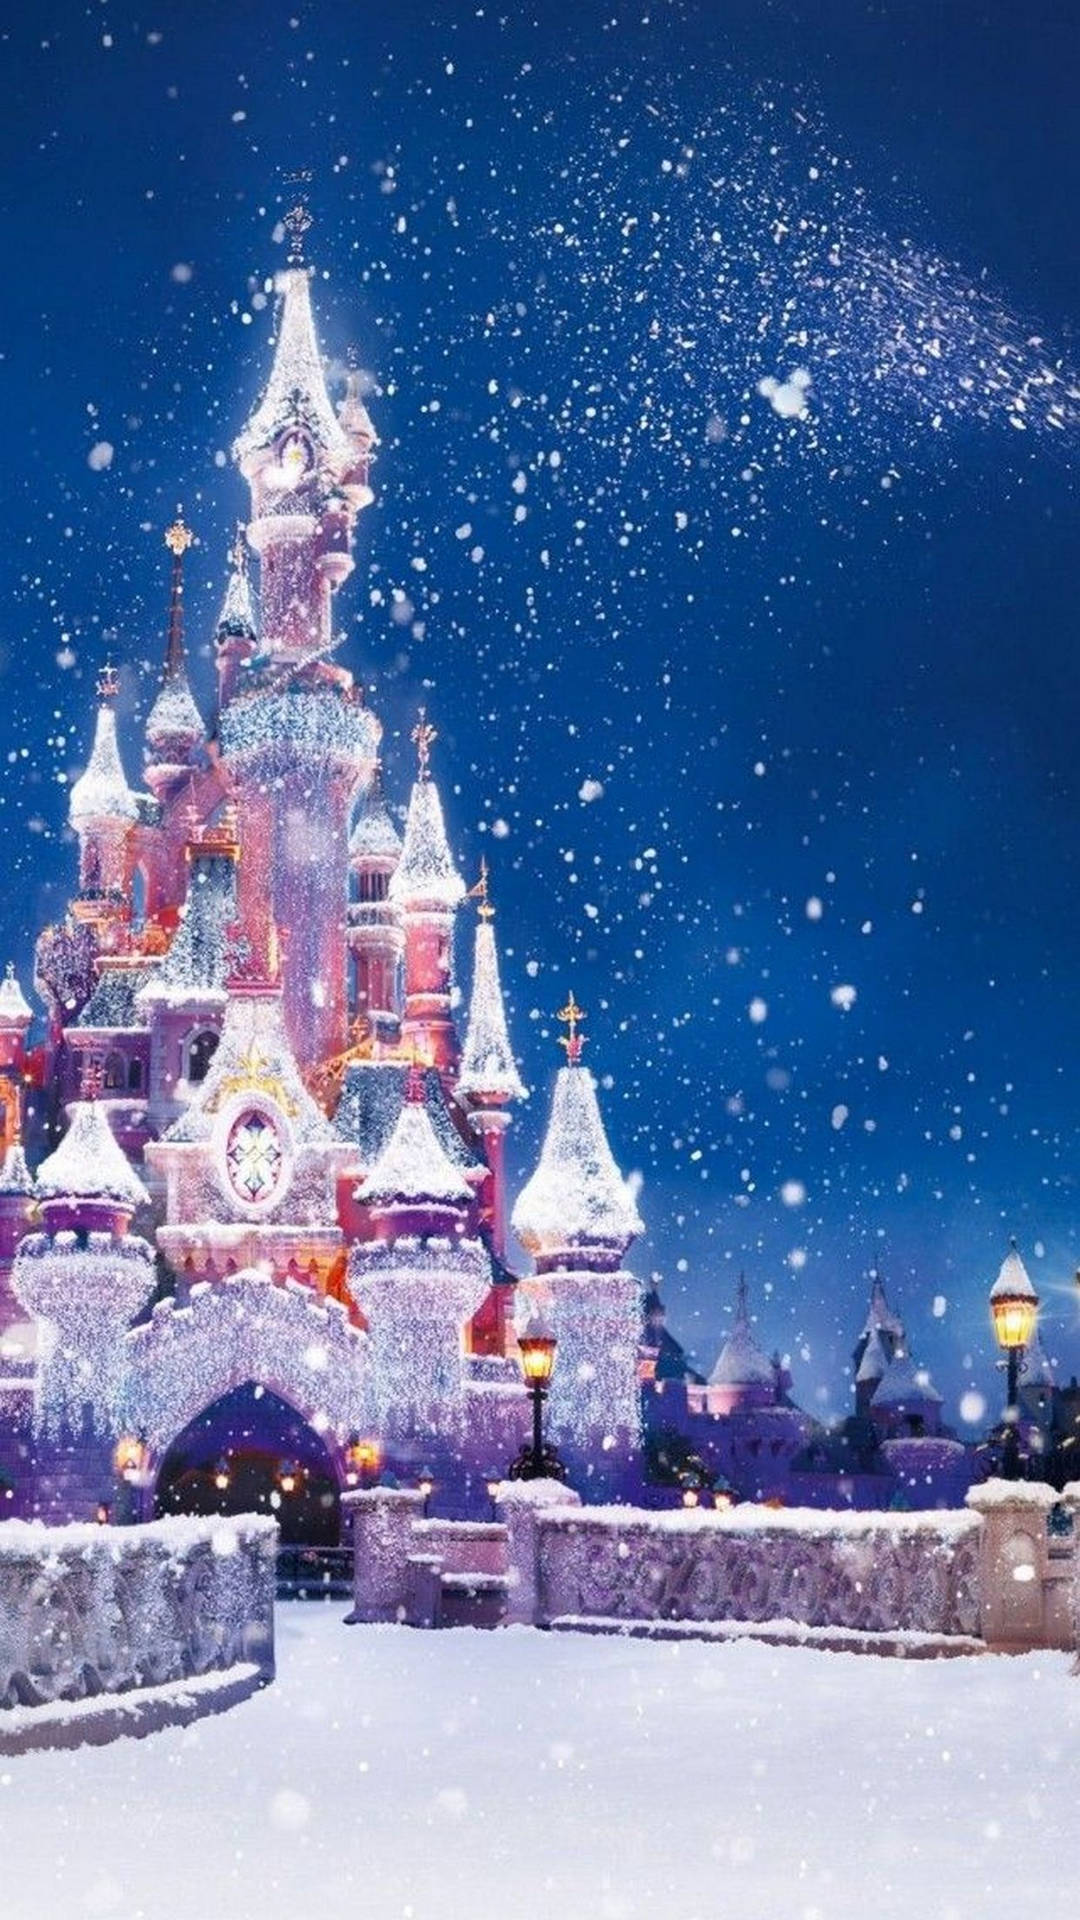 Christmas Winter Snow Fairy Tale Castle Iphone Background